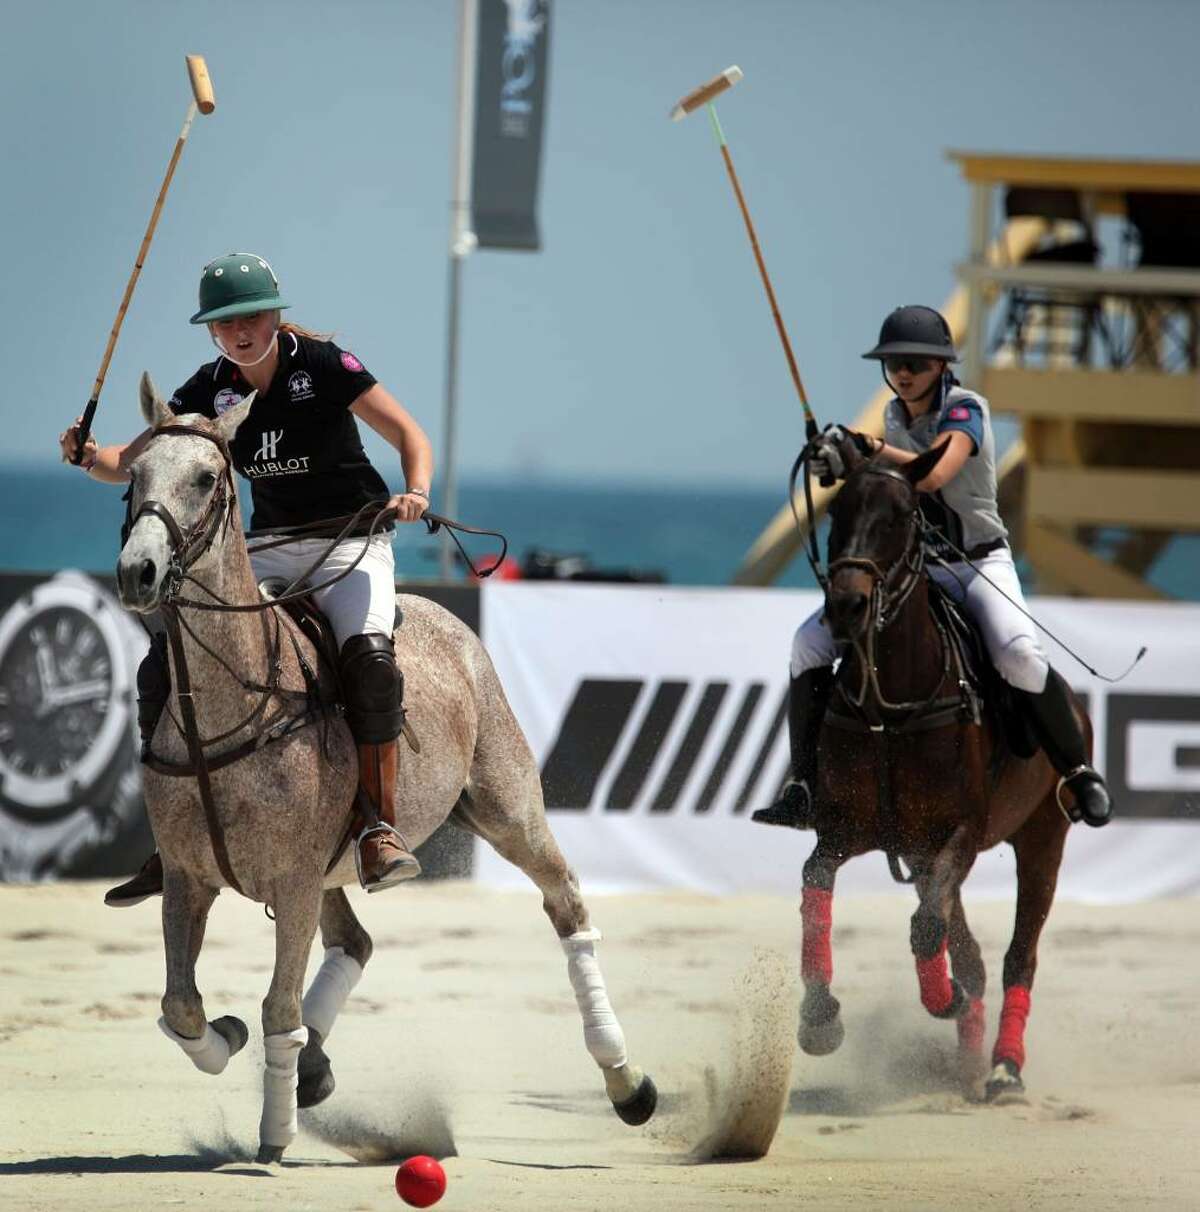 MIAMI BEACH - APRIL 22: Polo players from the Hublot team (L) and Morgan Stanley Smith Barney chase down a ball during their match at the AMG South Beach Women's Polo Cup on April 22, 2010 in Miami Beach, Florida. The women's tournament attracts top players for the beach-side matches. The men's AMG Miami Beach Polo World Cup tournament starts tomorrow and runs through Sunday. (Photo by Joe Raedle/Getty Images)